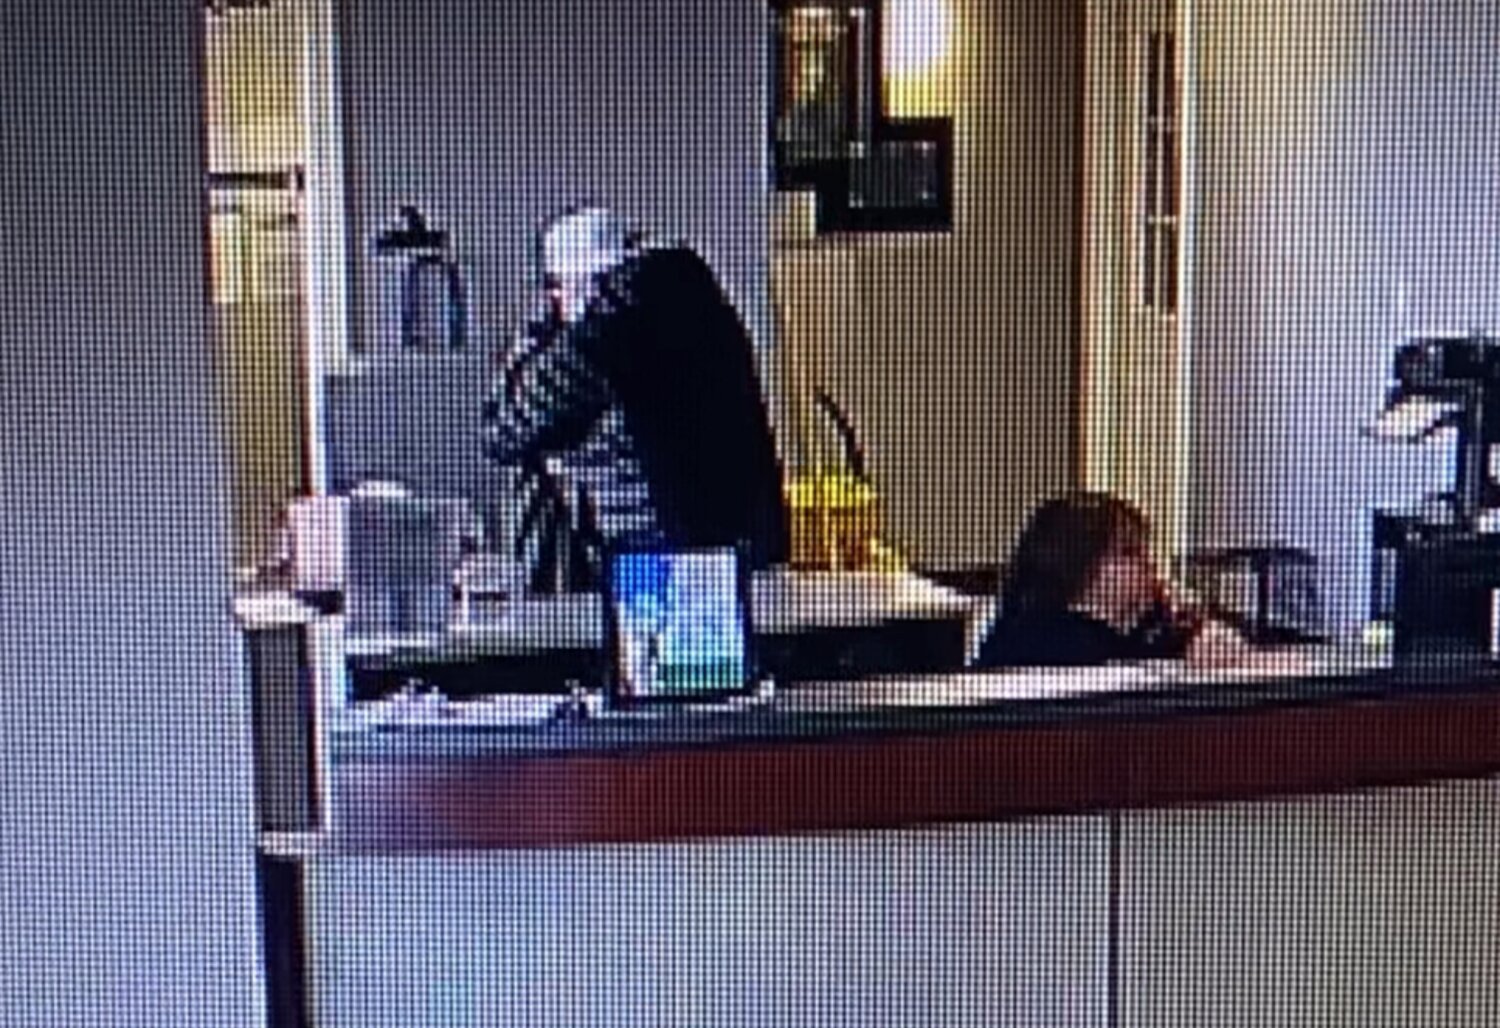 Surveillance footage captures Executive Director Darren Ullmann embracing the suicidal dog owner, Tuesday, Nov. 28 at the Humane Society of Cowlitz County in Longview.